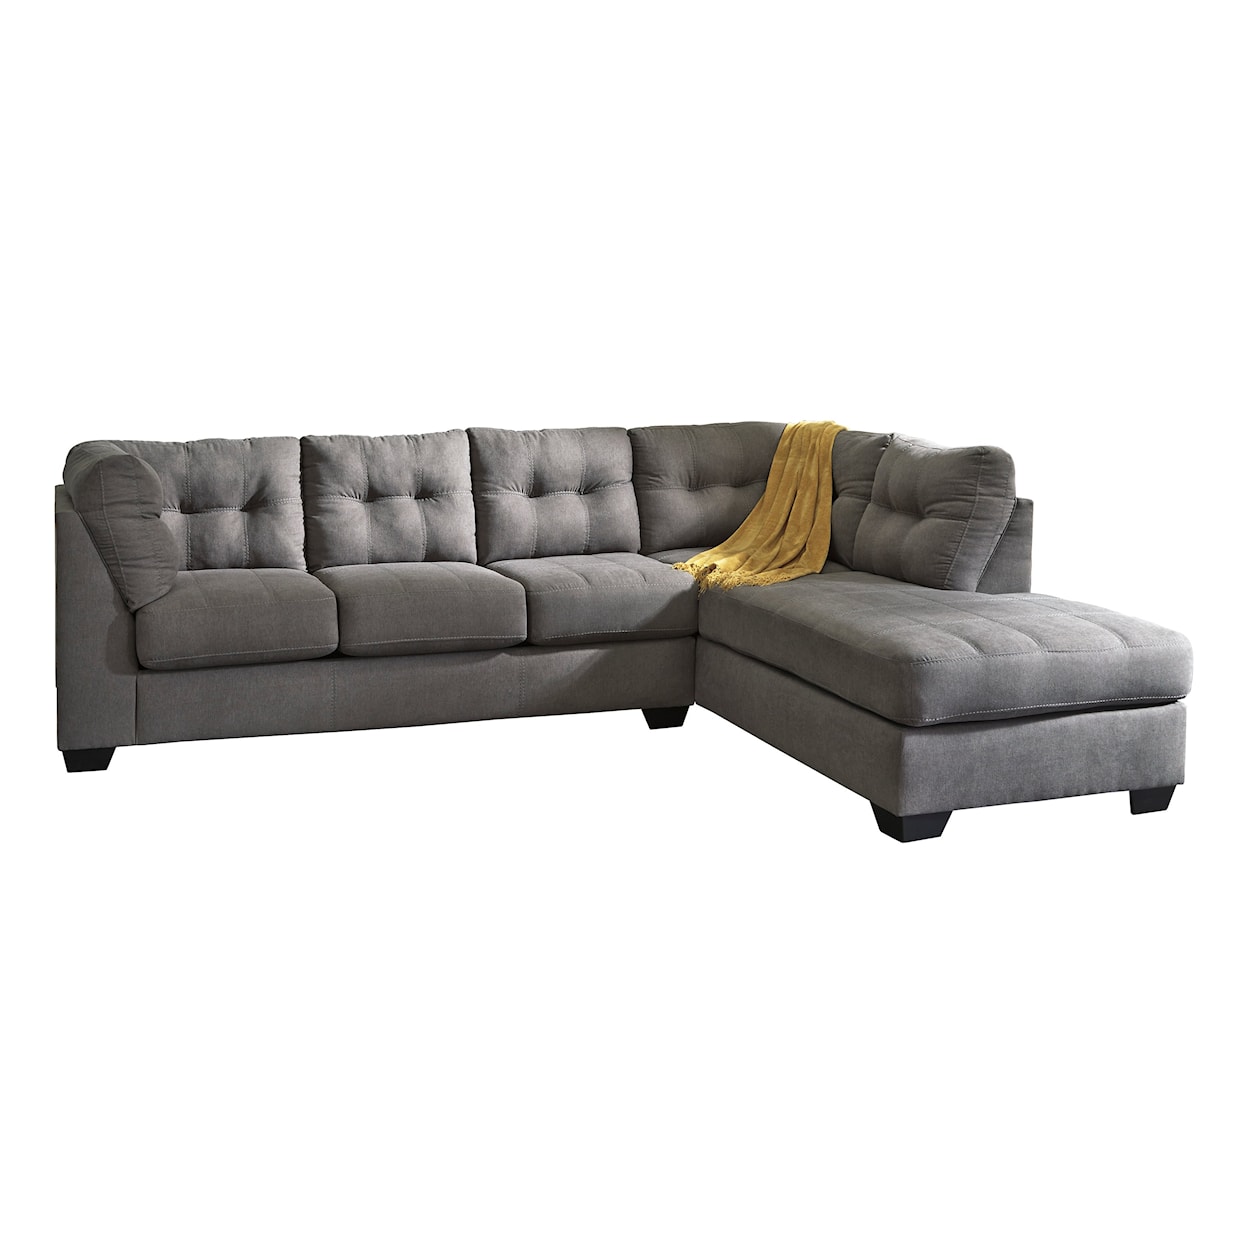 Benchcraft Maier 2-Piece Sectional with Chaise